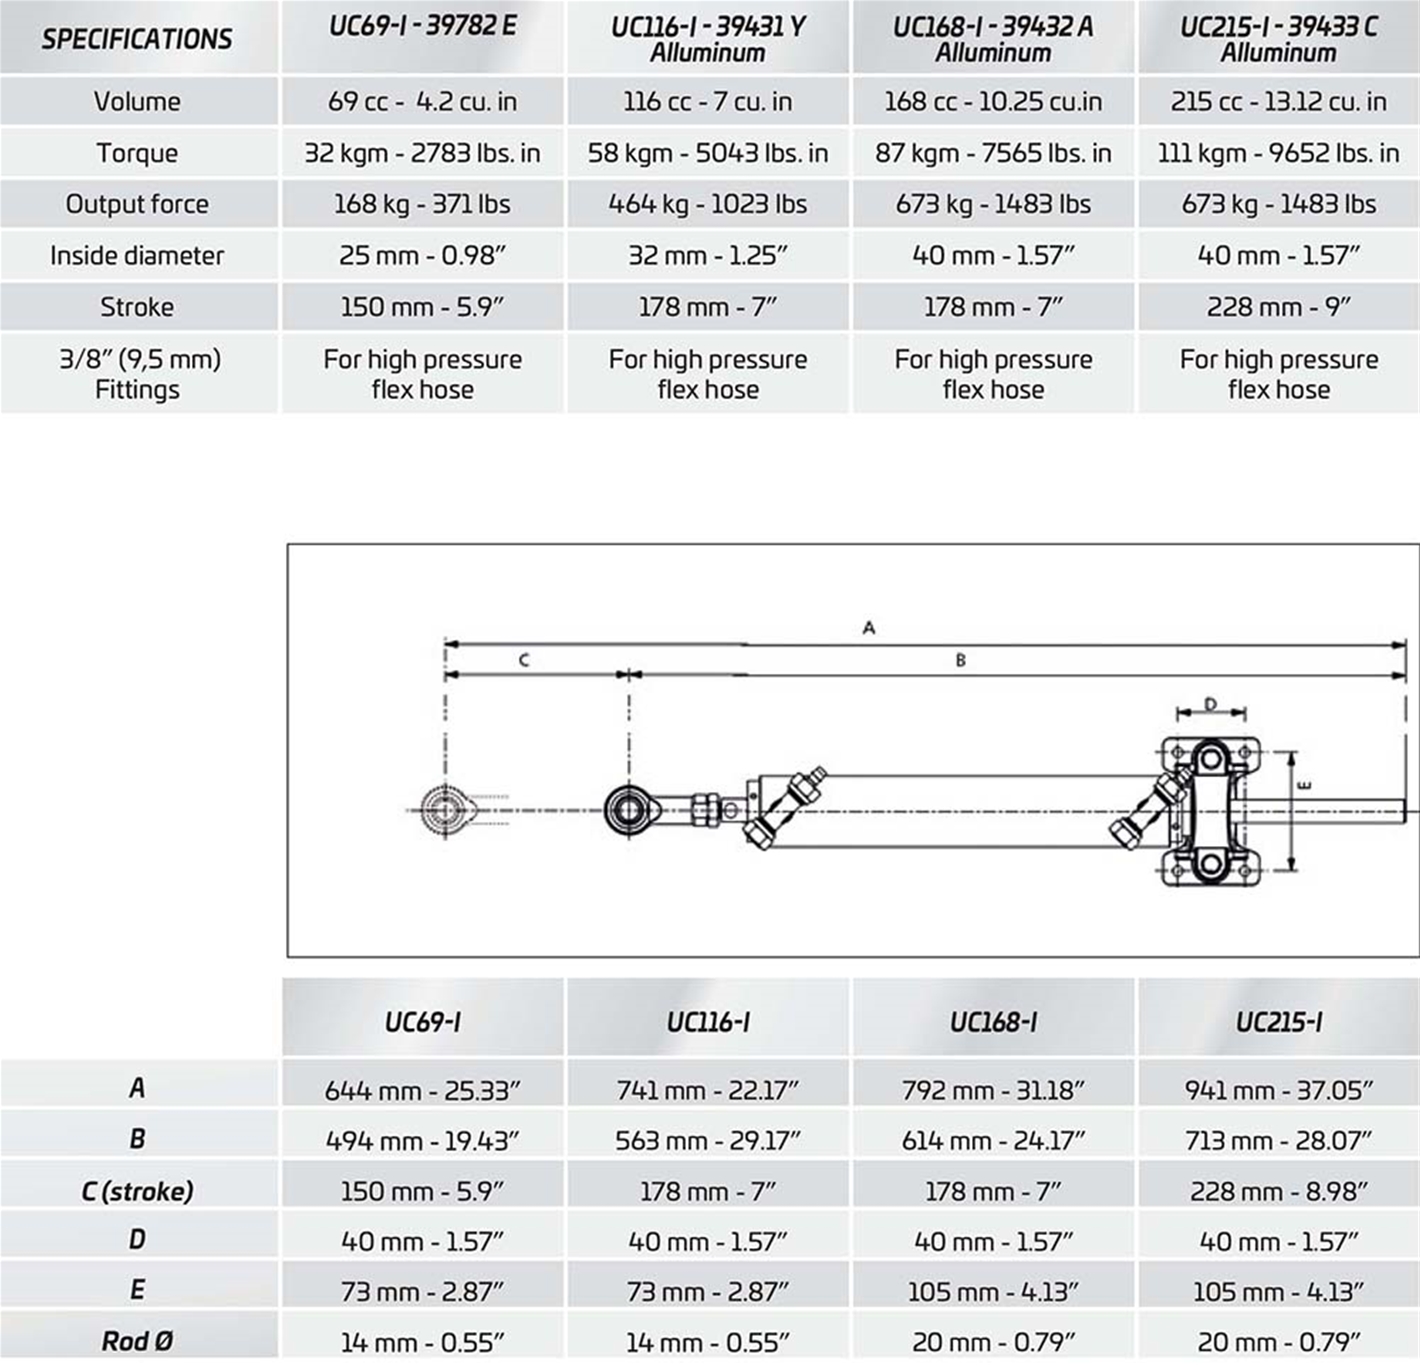 Inboard Cylinder Specifications